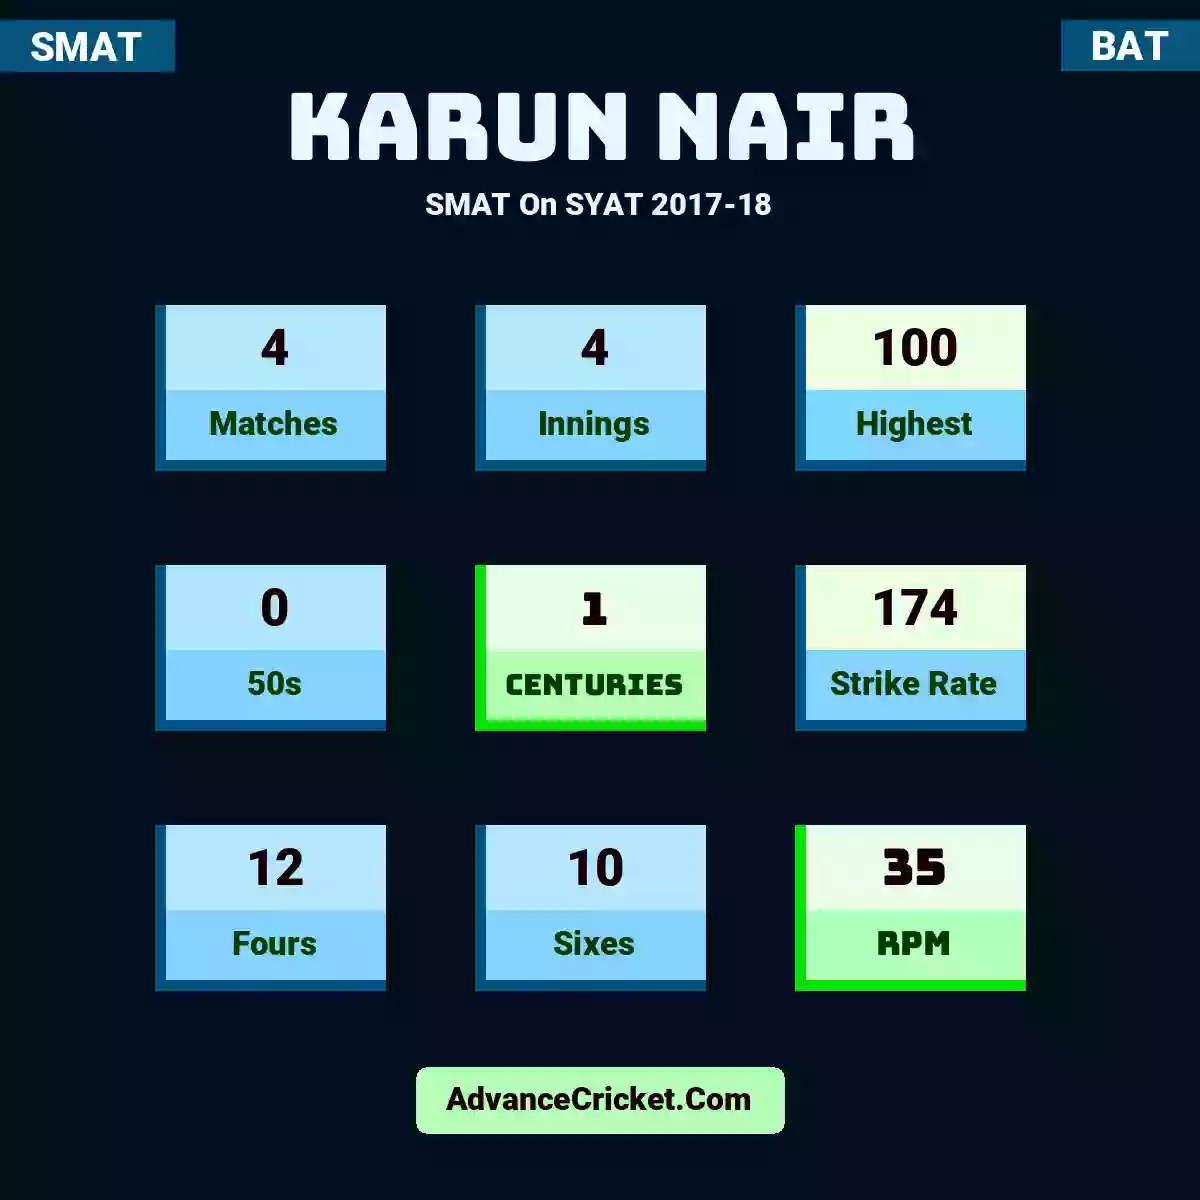 Karun Nair SMAT  On SYAT 2017-18, Karun Nair played 4 matches, scored 100 runs as highest, 0 half-centuries, and 1 centuries, with a strike rate of 174. K.Nair hit 12 fours and 10 sixes, with an RPM of 35.